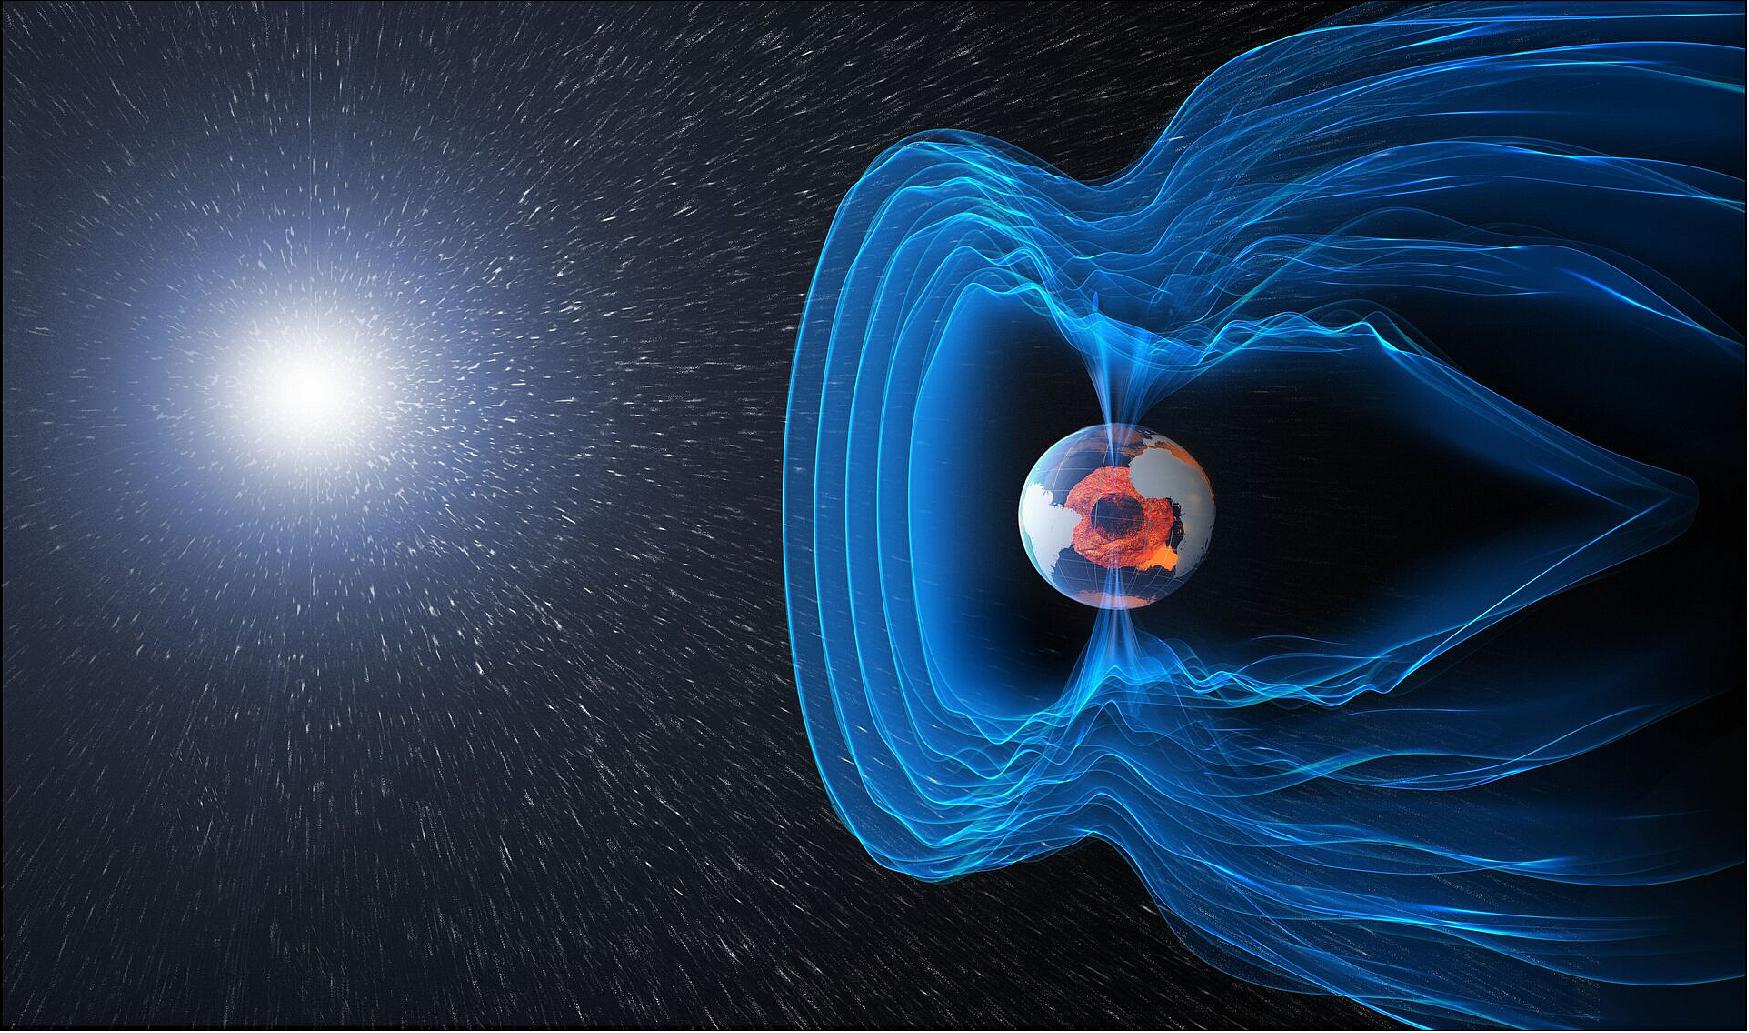 Figure 41: Earth's protective shield. The magnetic field and electric currents in and around Earth generate complex forces that have immeasurable impact on every day life. The field can be thought of as a huge bubble, protecting us from cosmic radiation and charged particles that bombard Earth in solar winds (image credit: ESA/ATG medialab)